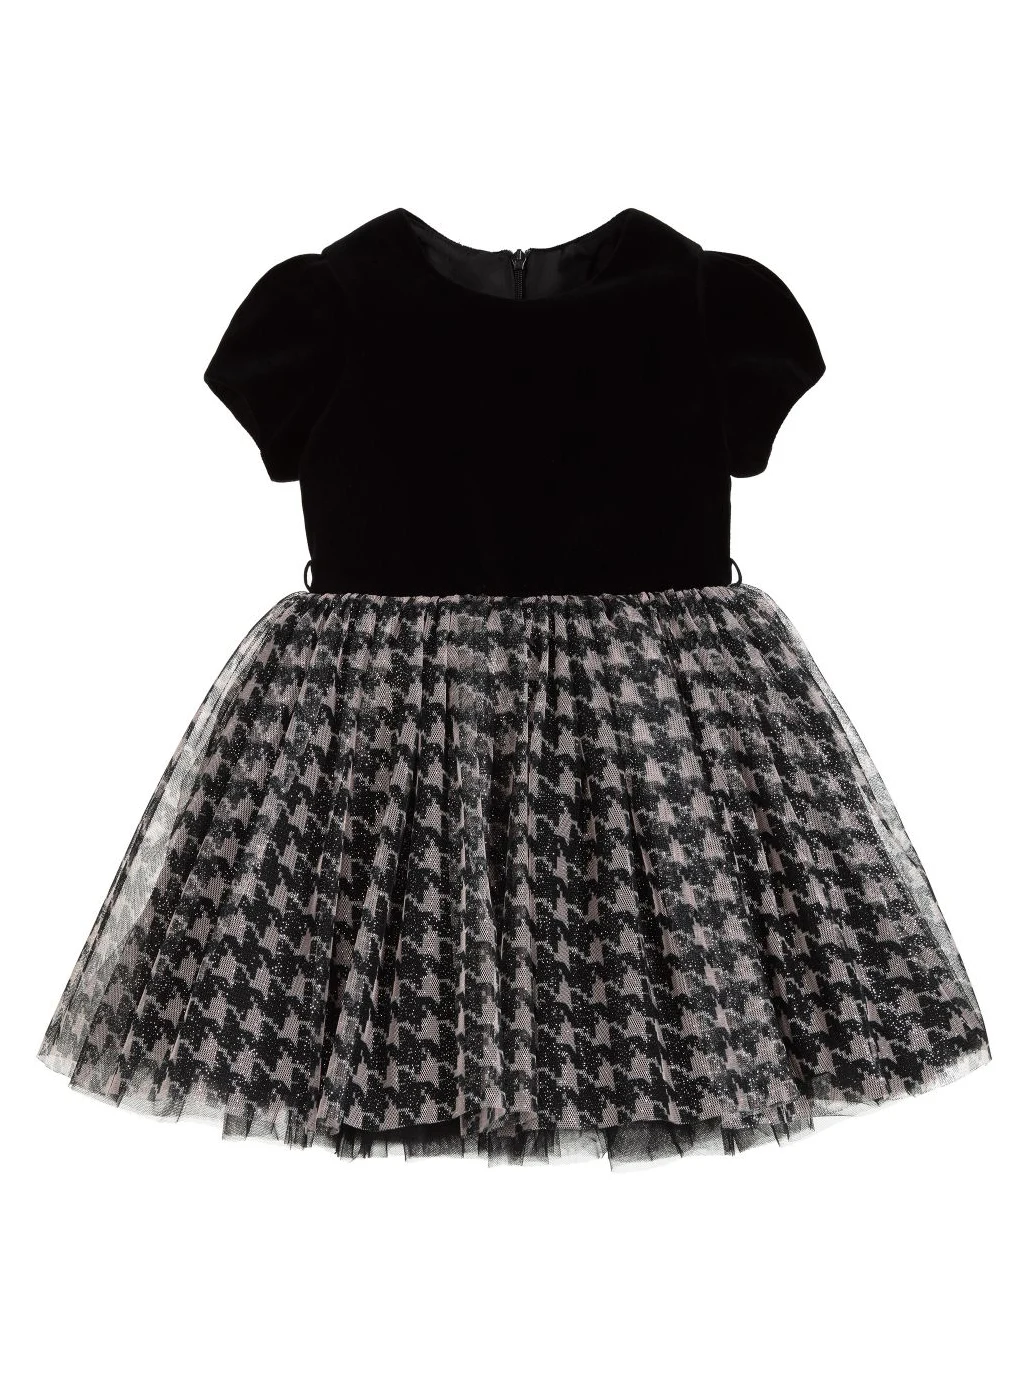 Fashionable winter classic baby girl party dress for girl 2-10 year